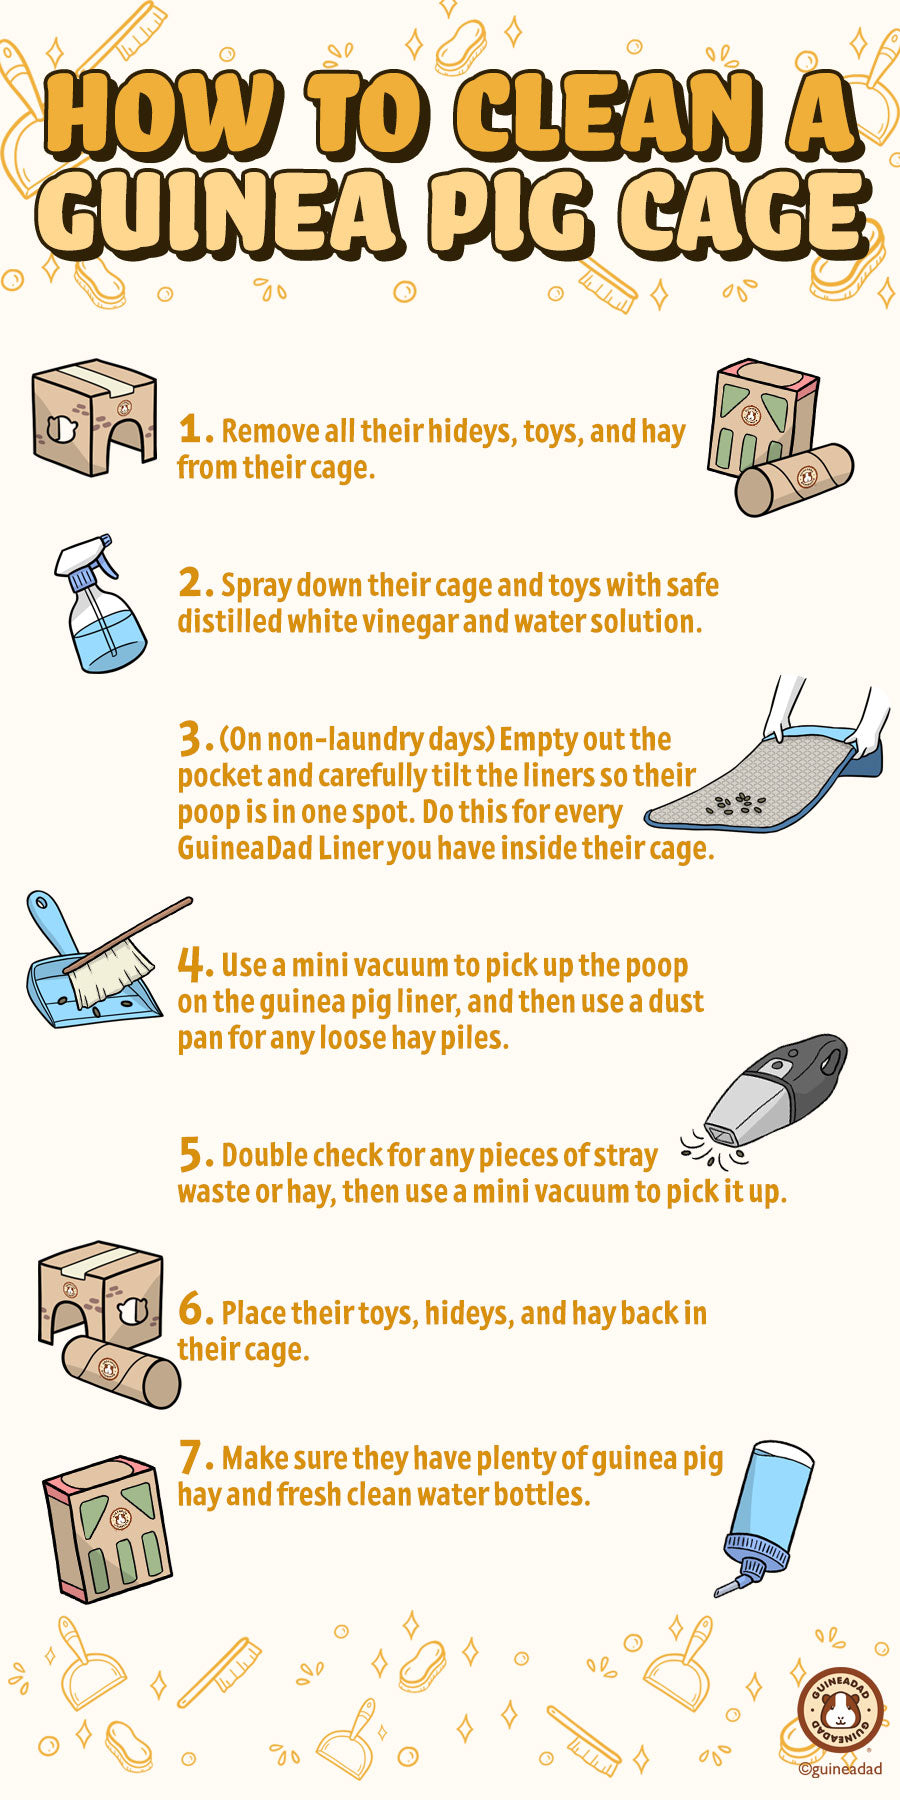 How to Clean a Guinea Pig Cage